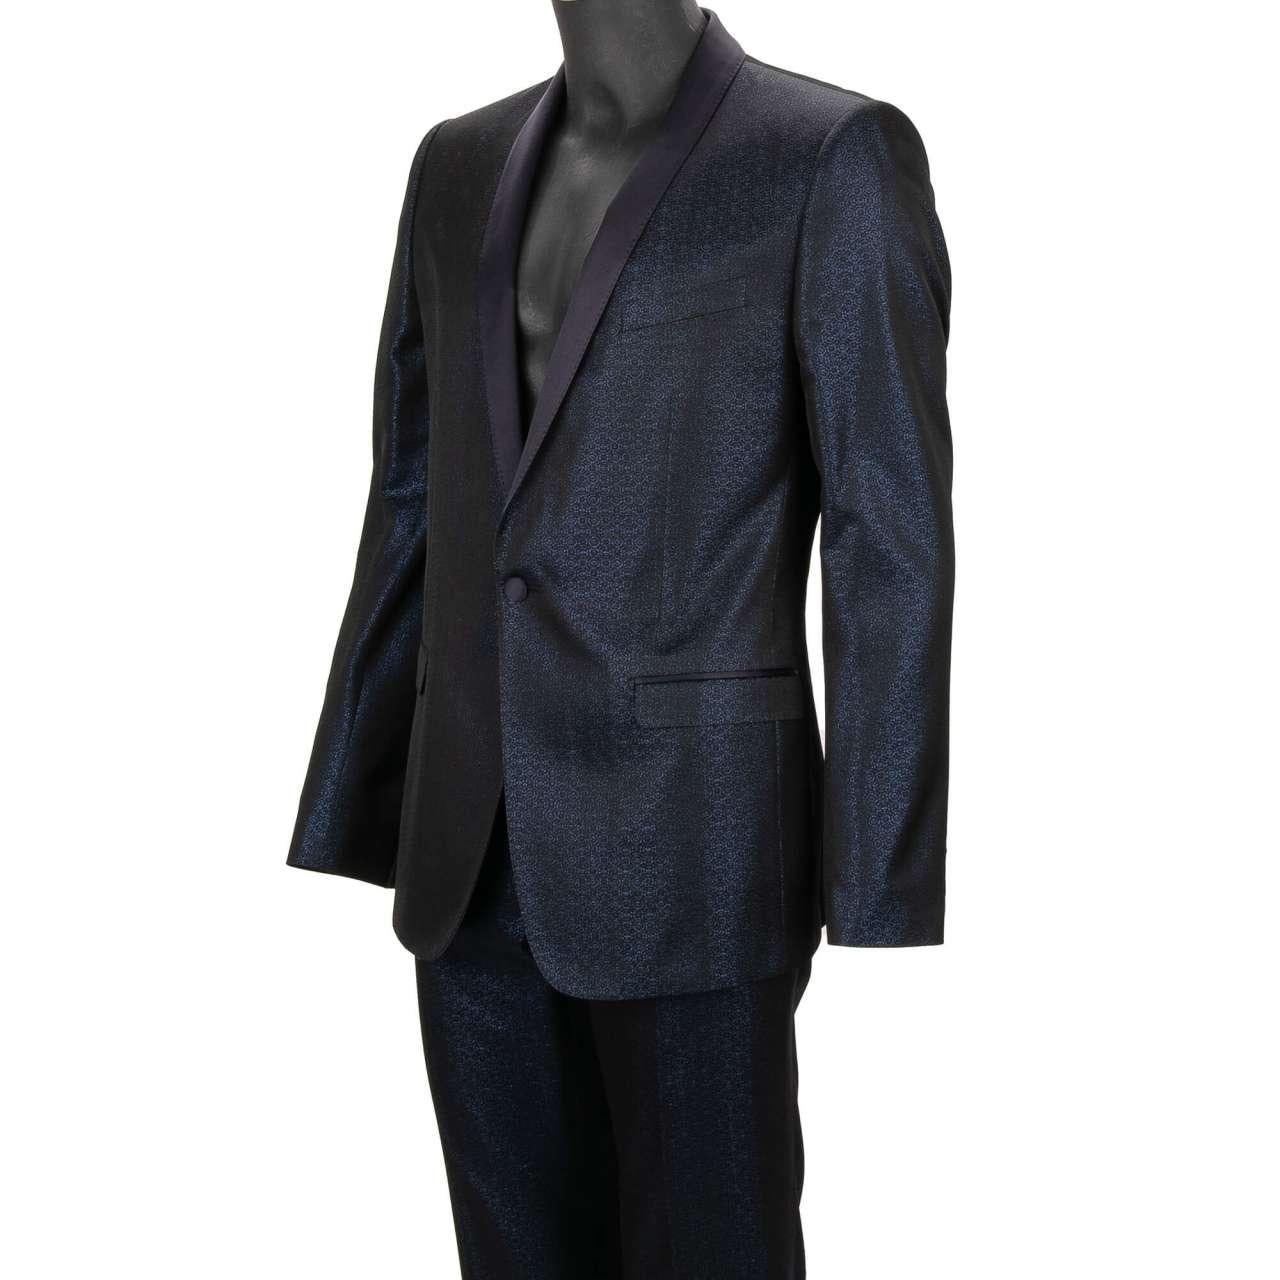 - Virgin wool 3 piece suit, jacket, waistcoat, pants with shawl silk lapel in black by DOLCE & GABBANA - MARTINI Model - RUNWAY - Dolce & Gabbana Fashion Show - New with tag - MADE in ITALY - Slim Fit - Model: GK2WMT-FU2Z8-N0000 - Material: 87%